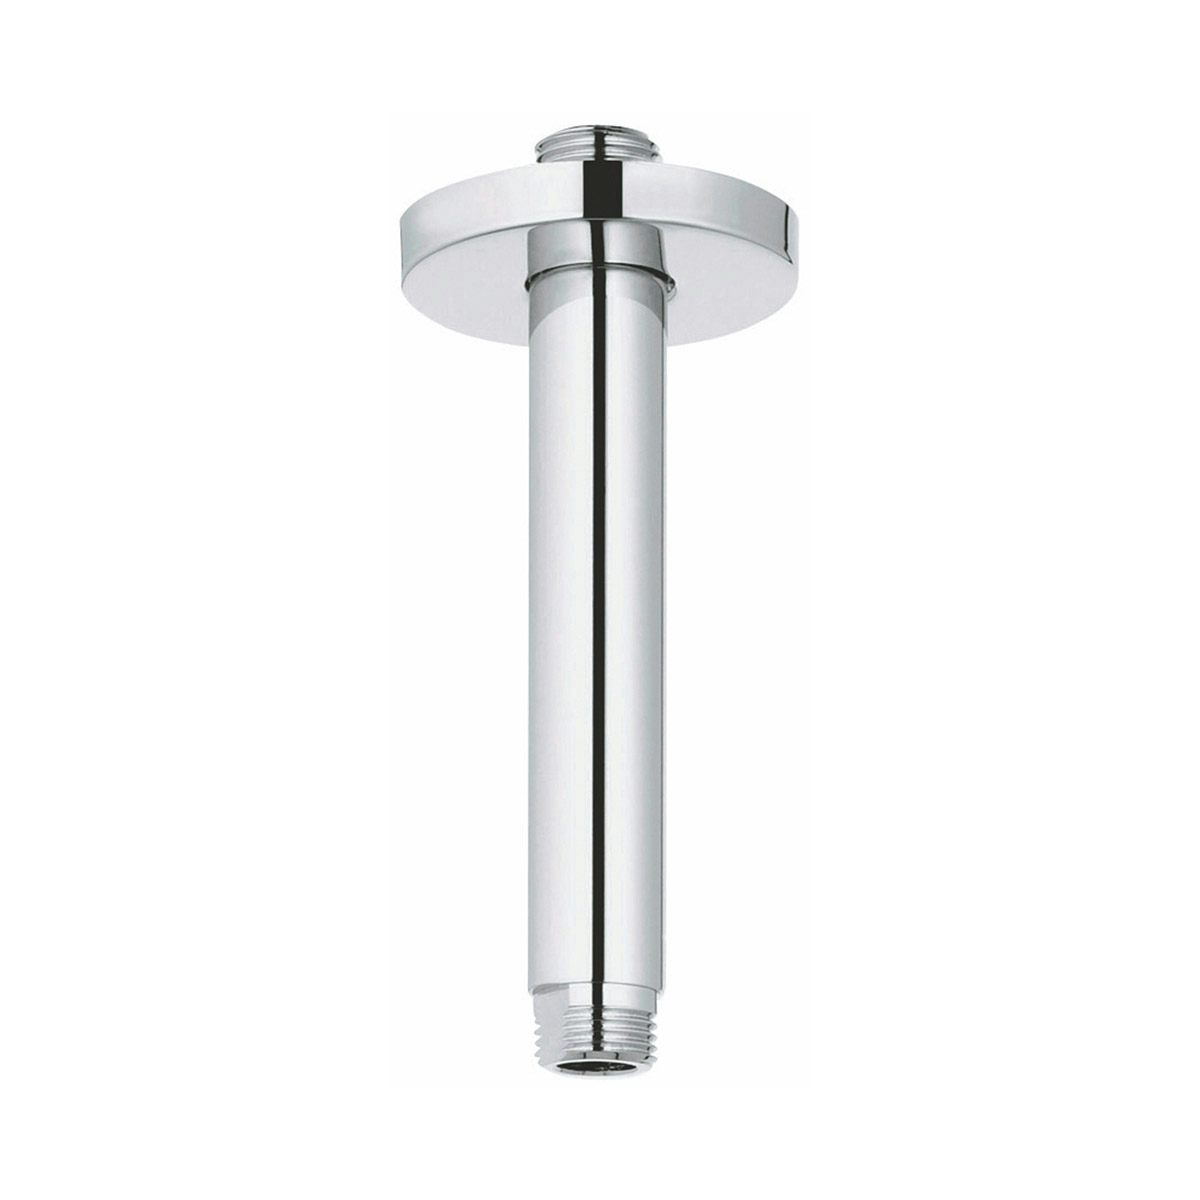 Grohe Rainshower round ceiling arm 142 mm